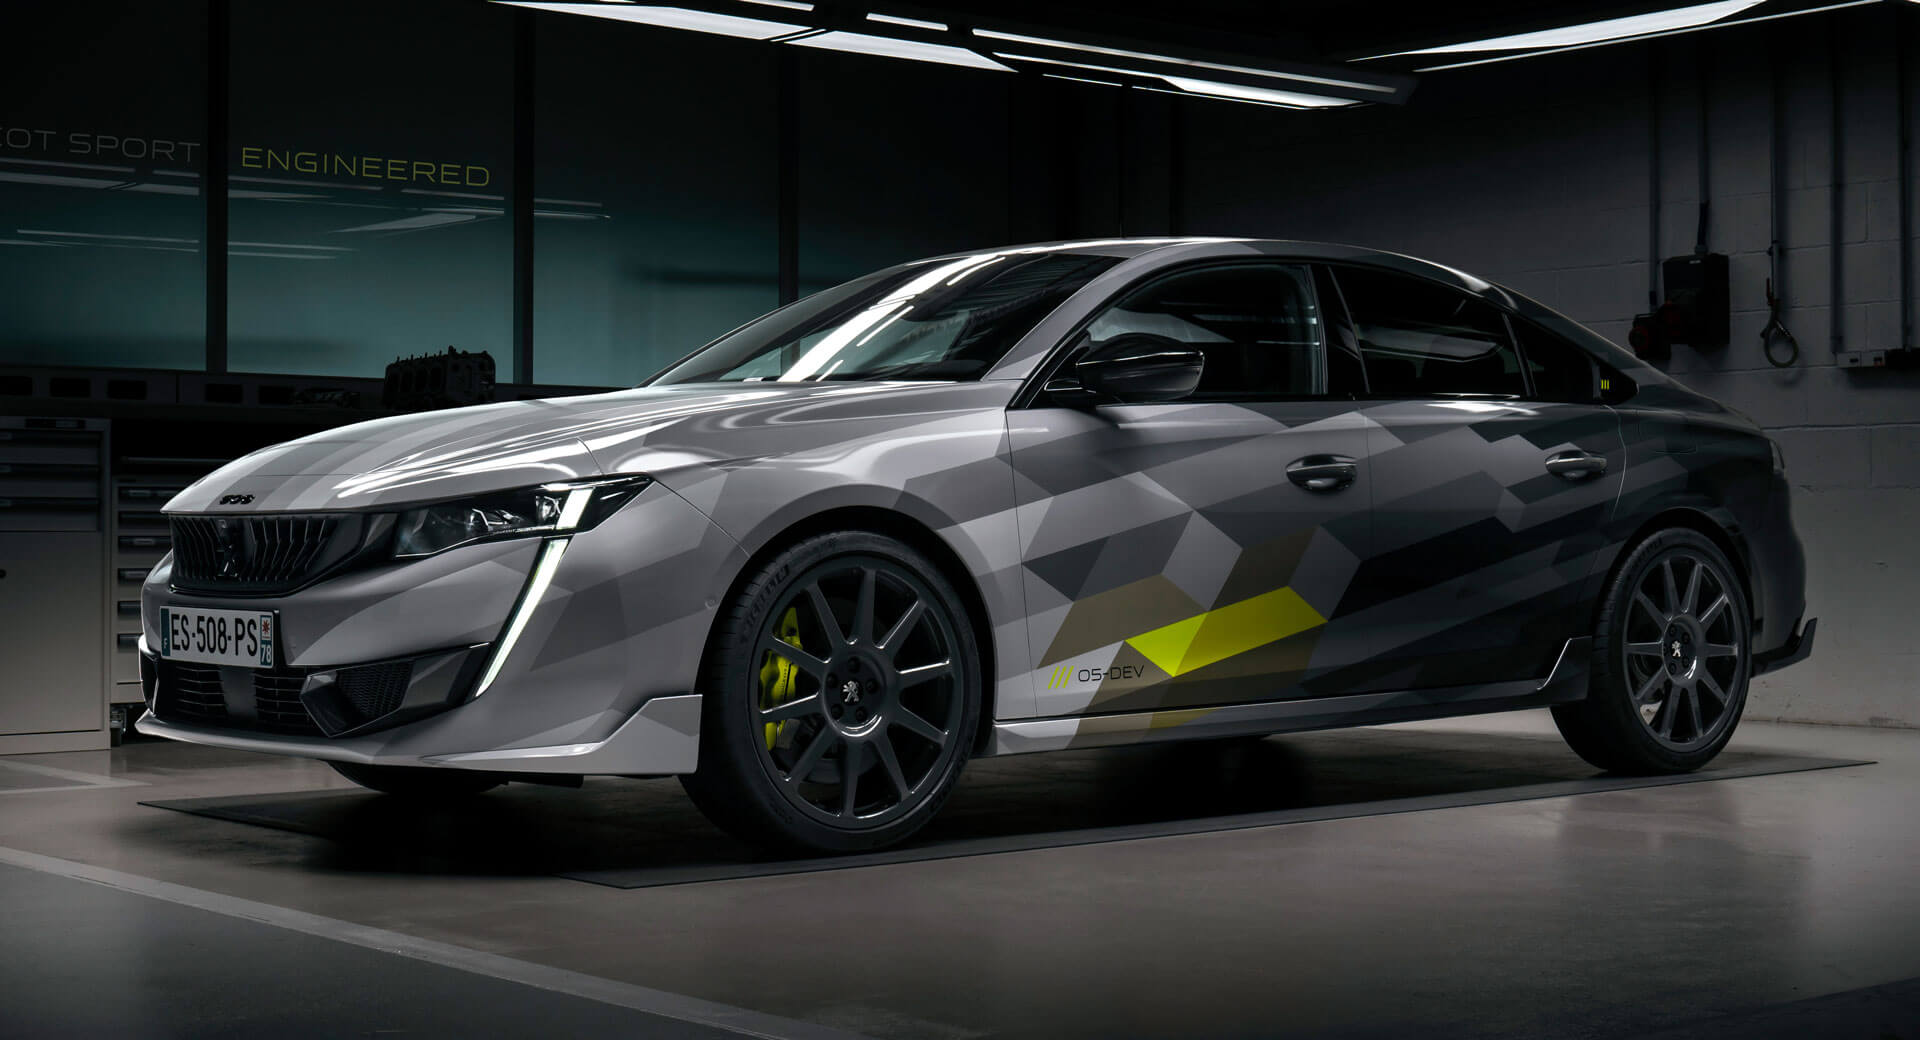 New 508 PSE Is Peugeot's Most Powerful Road Car Ever